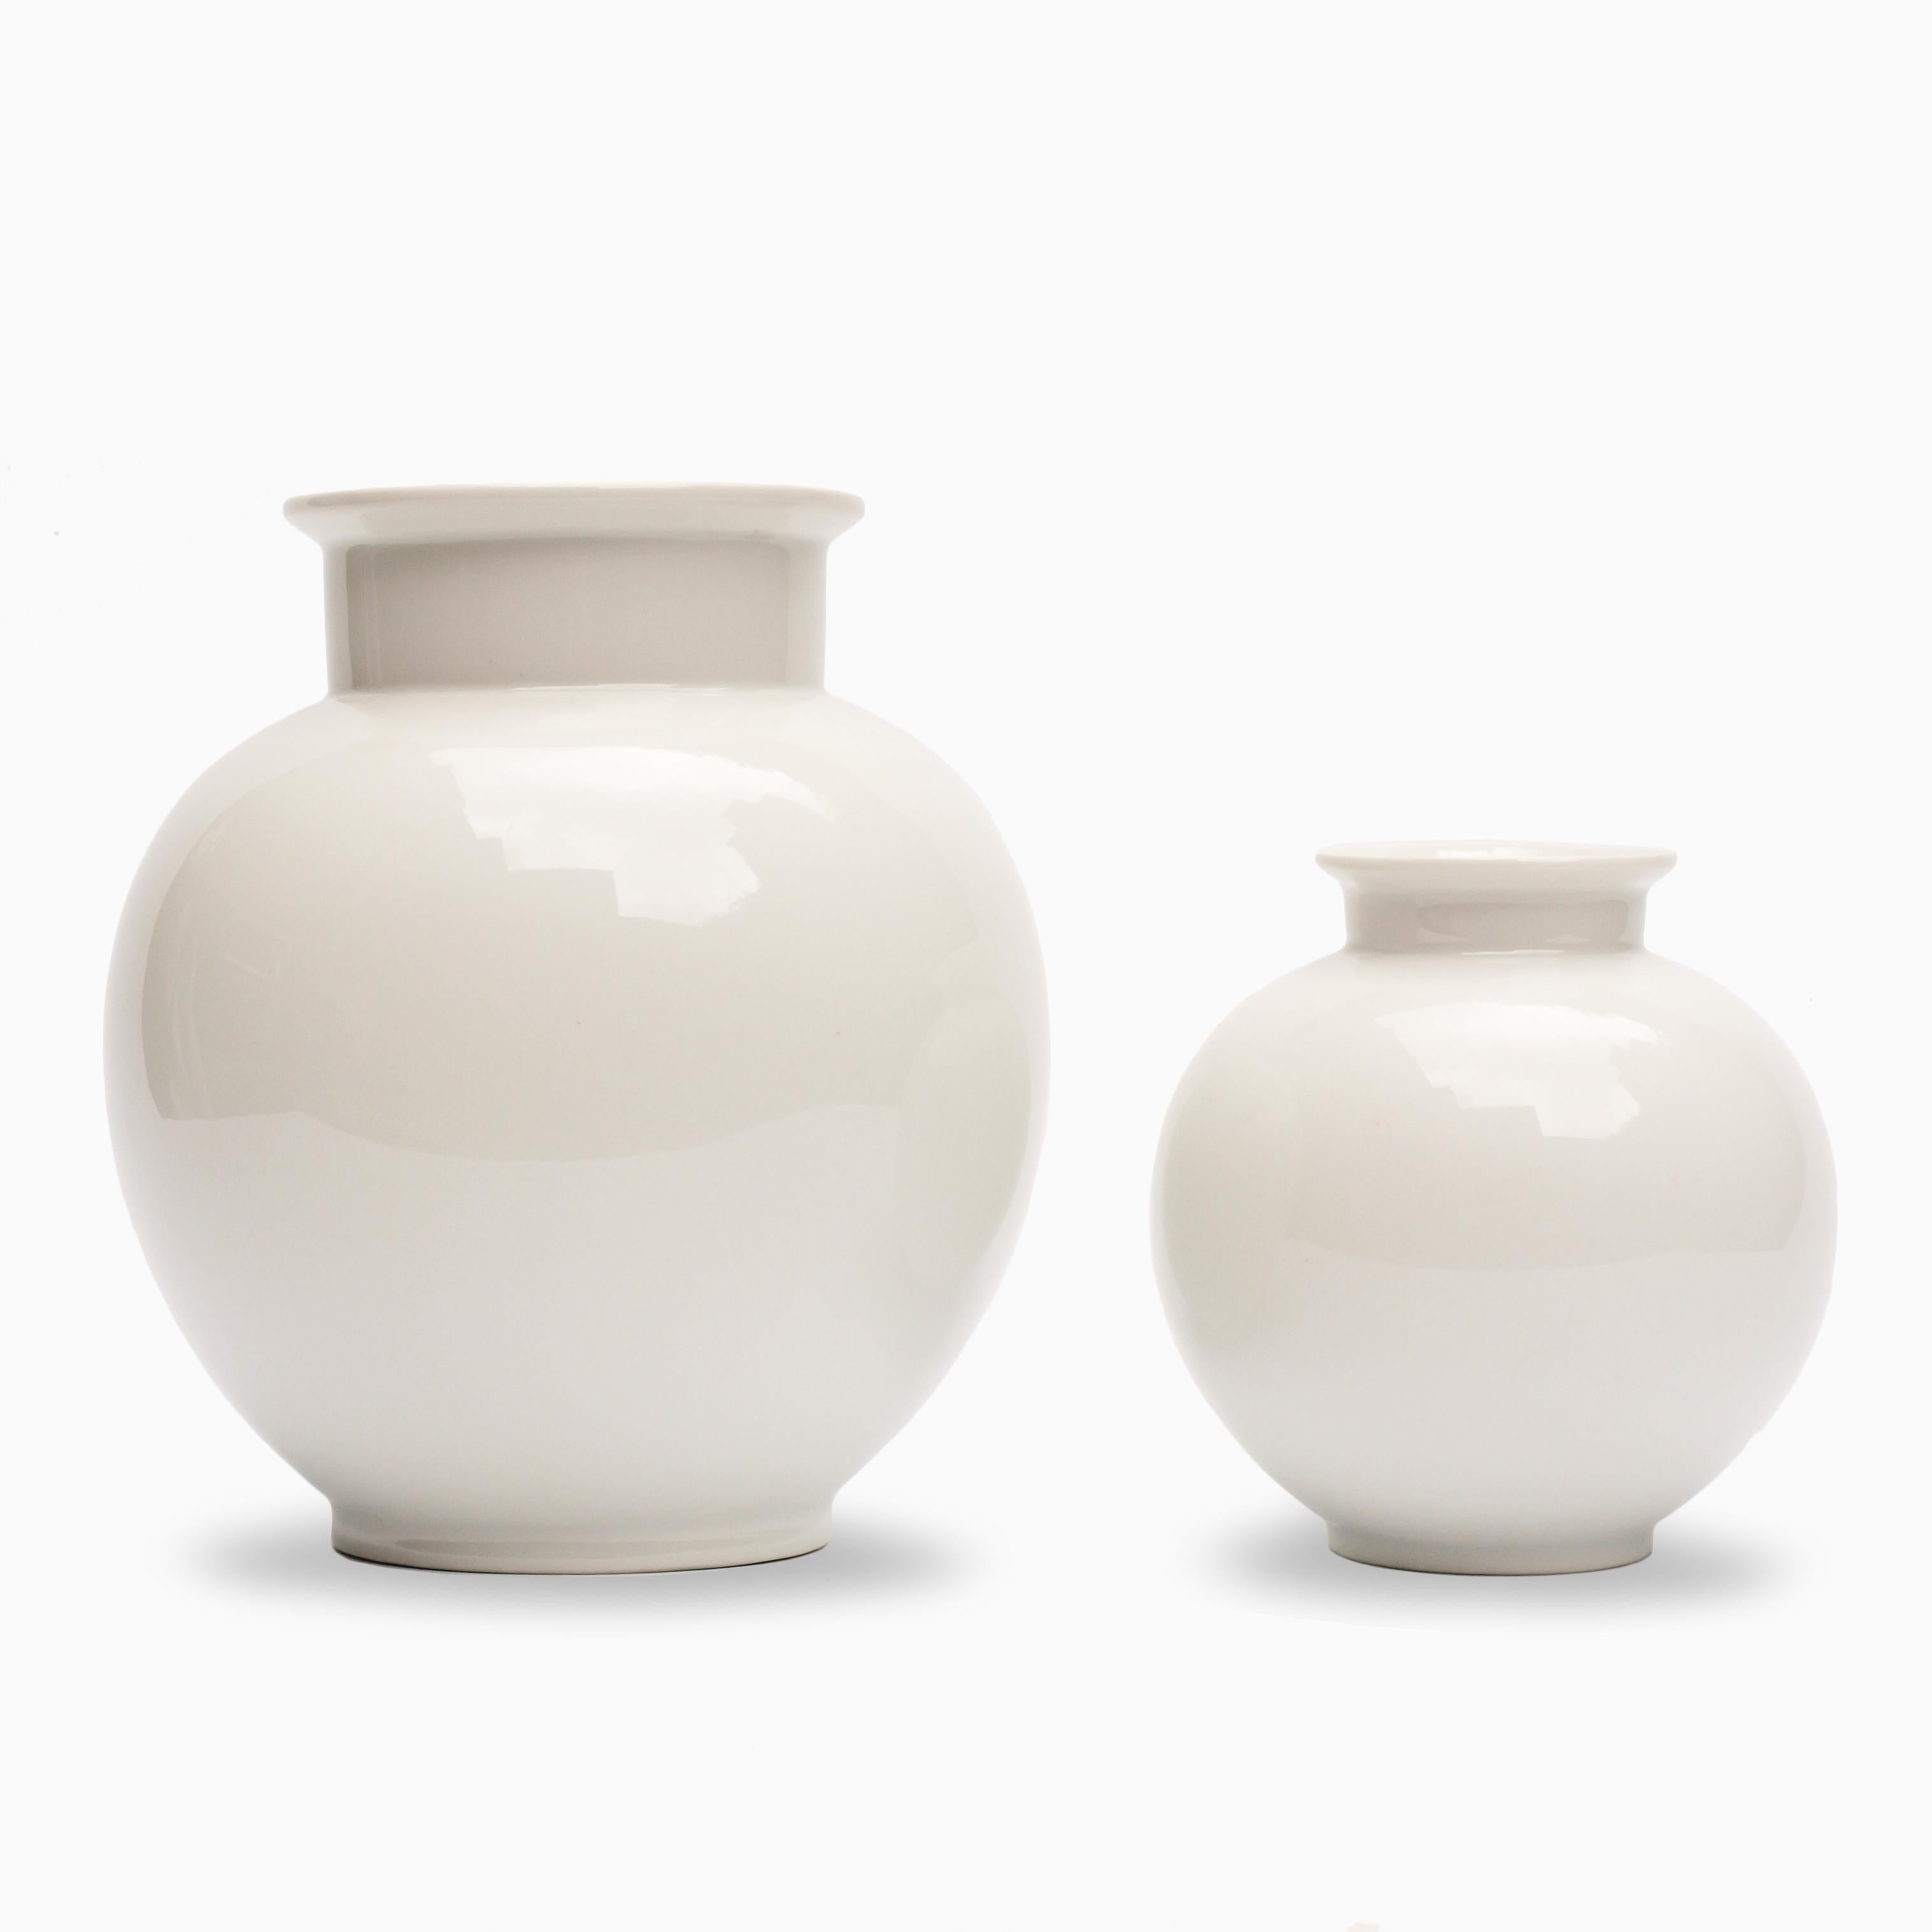 A great pair of white Porcelain flower vases of minimal design by Thomas, Germany, 1970-1975.

Dimensions:
Three litre vase: Height 22 cm, Diameter 20 cm
One litre vase: Height 14 cm, Diameter 12 cm.
        